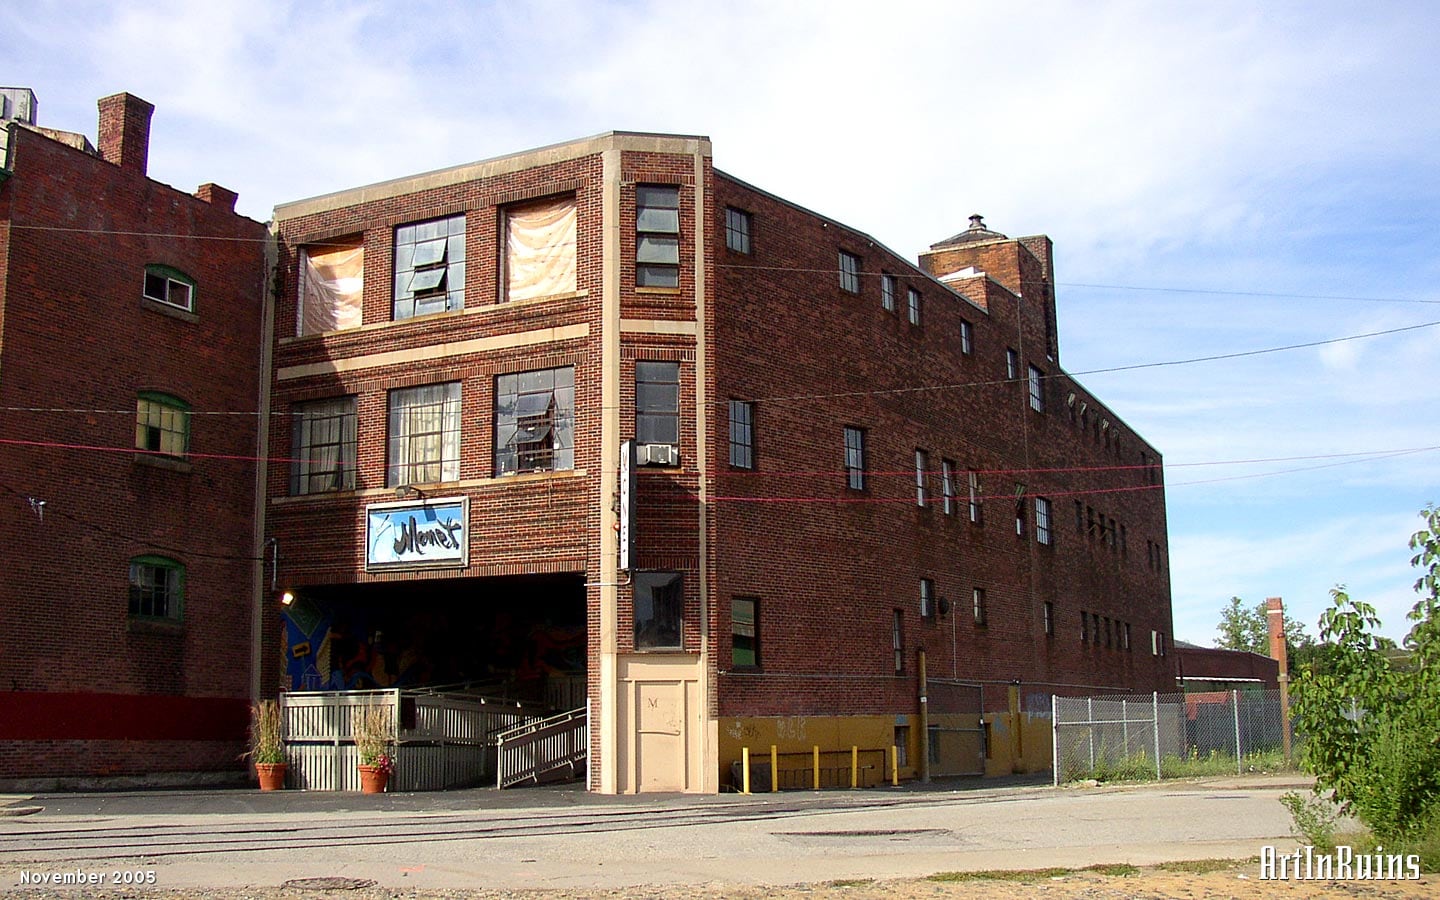 A three story red brick building with granite edging three-bays wide and four times as deep as it is wide. Built alongside a rail spur, the building bends slightly as it moves back.